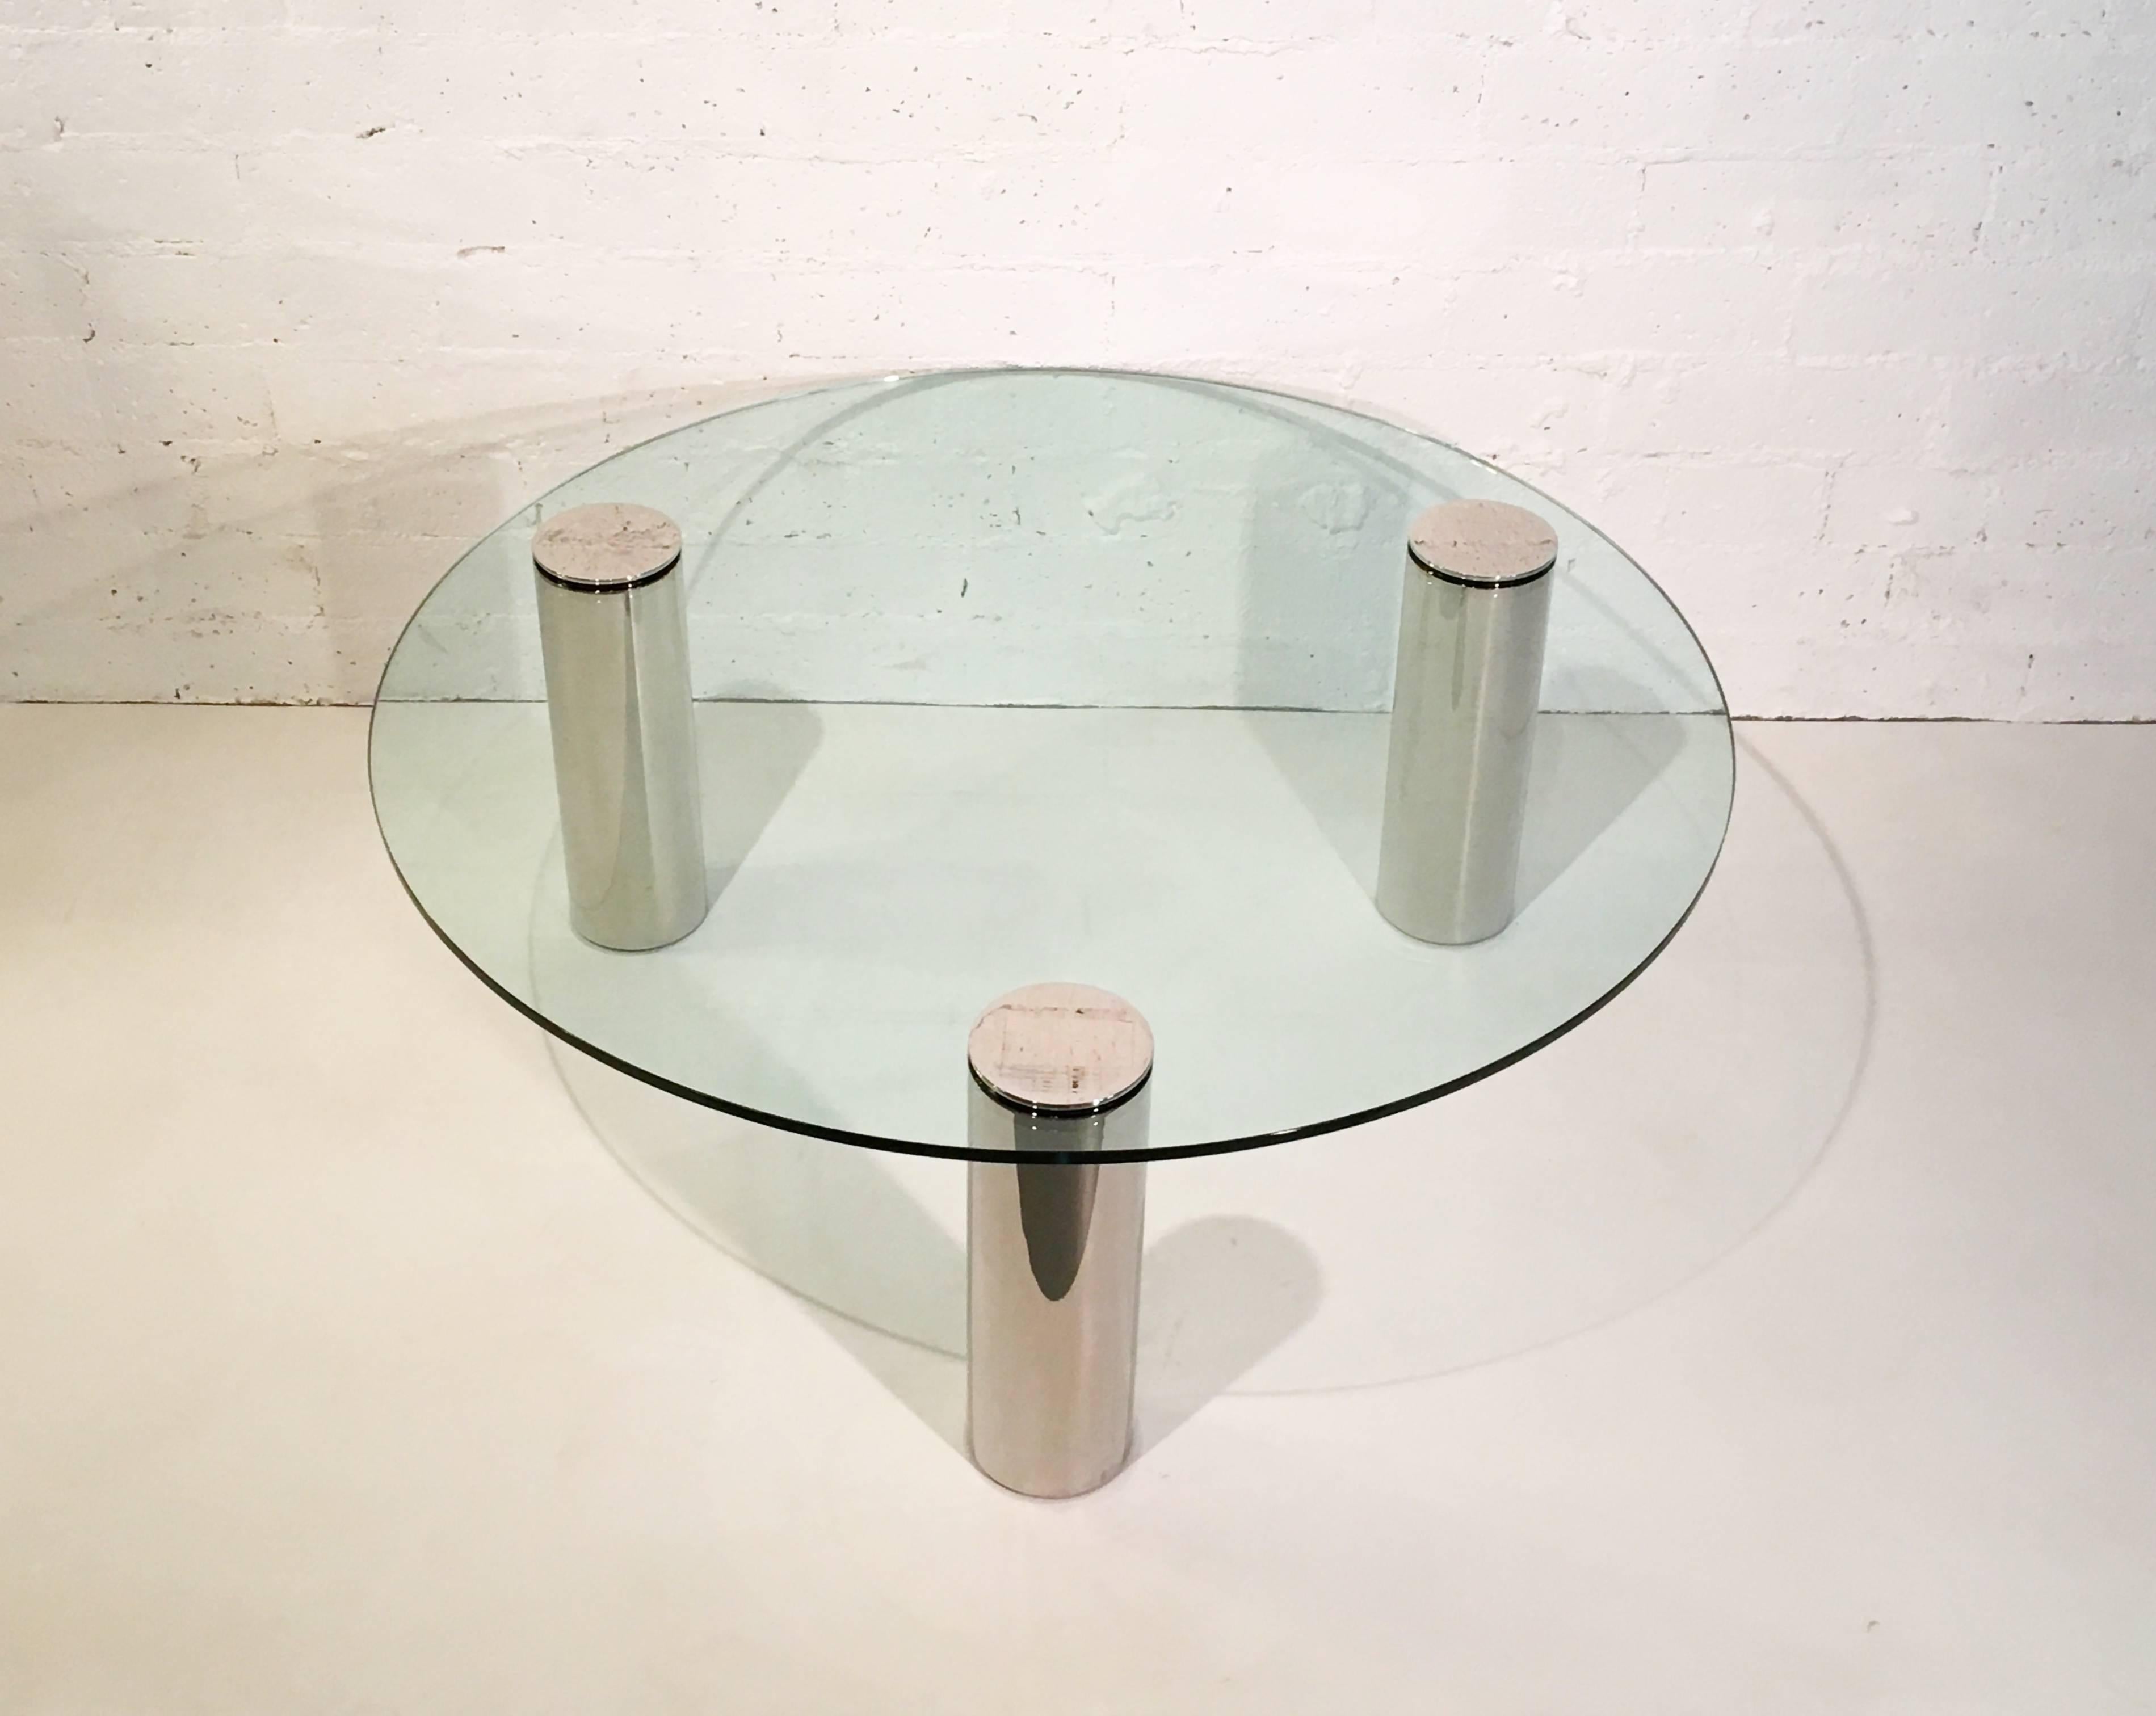 A beautiful 1970s tripod cocktail table by Pace Collection.
Newly nickel-plated and new 48